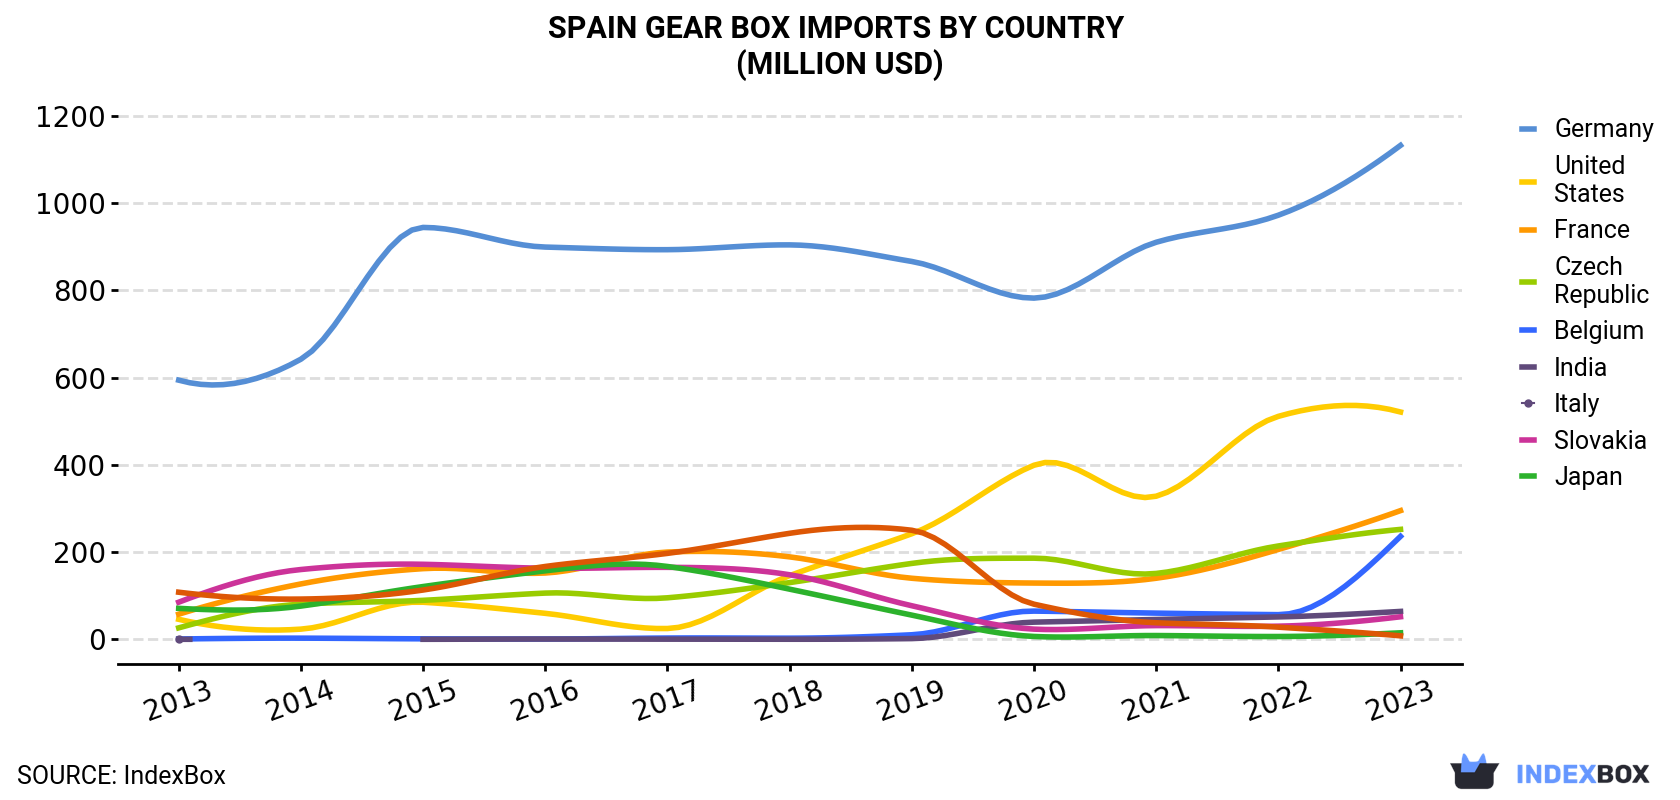 Spain Gear Box Imports By Country (Million USD)